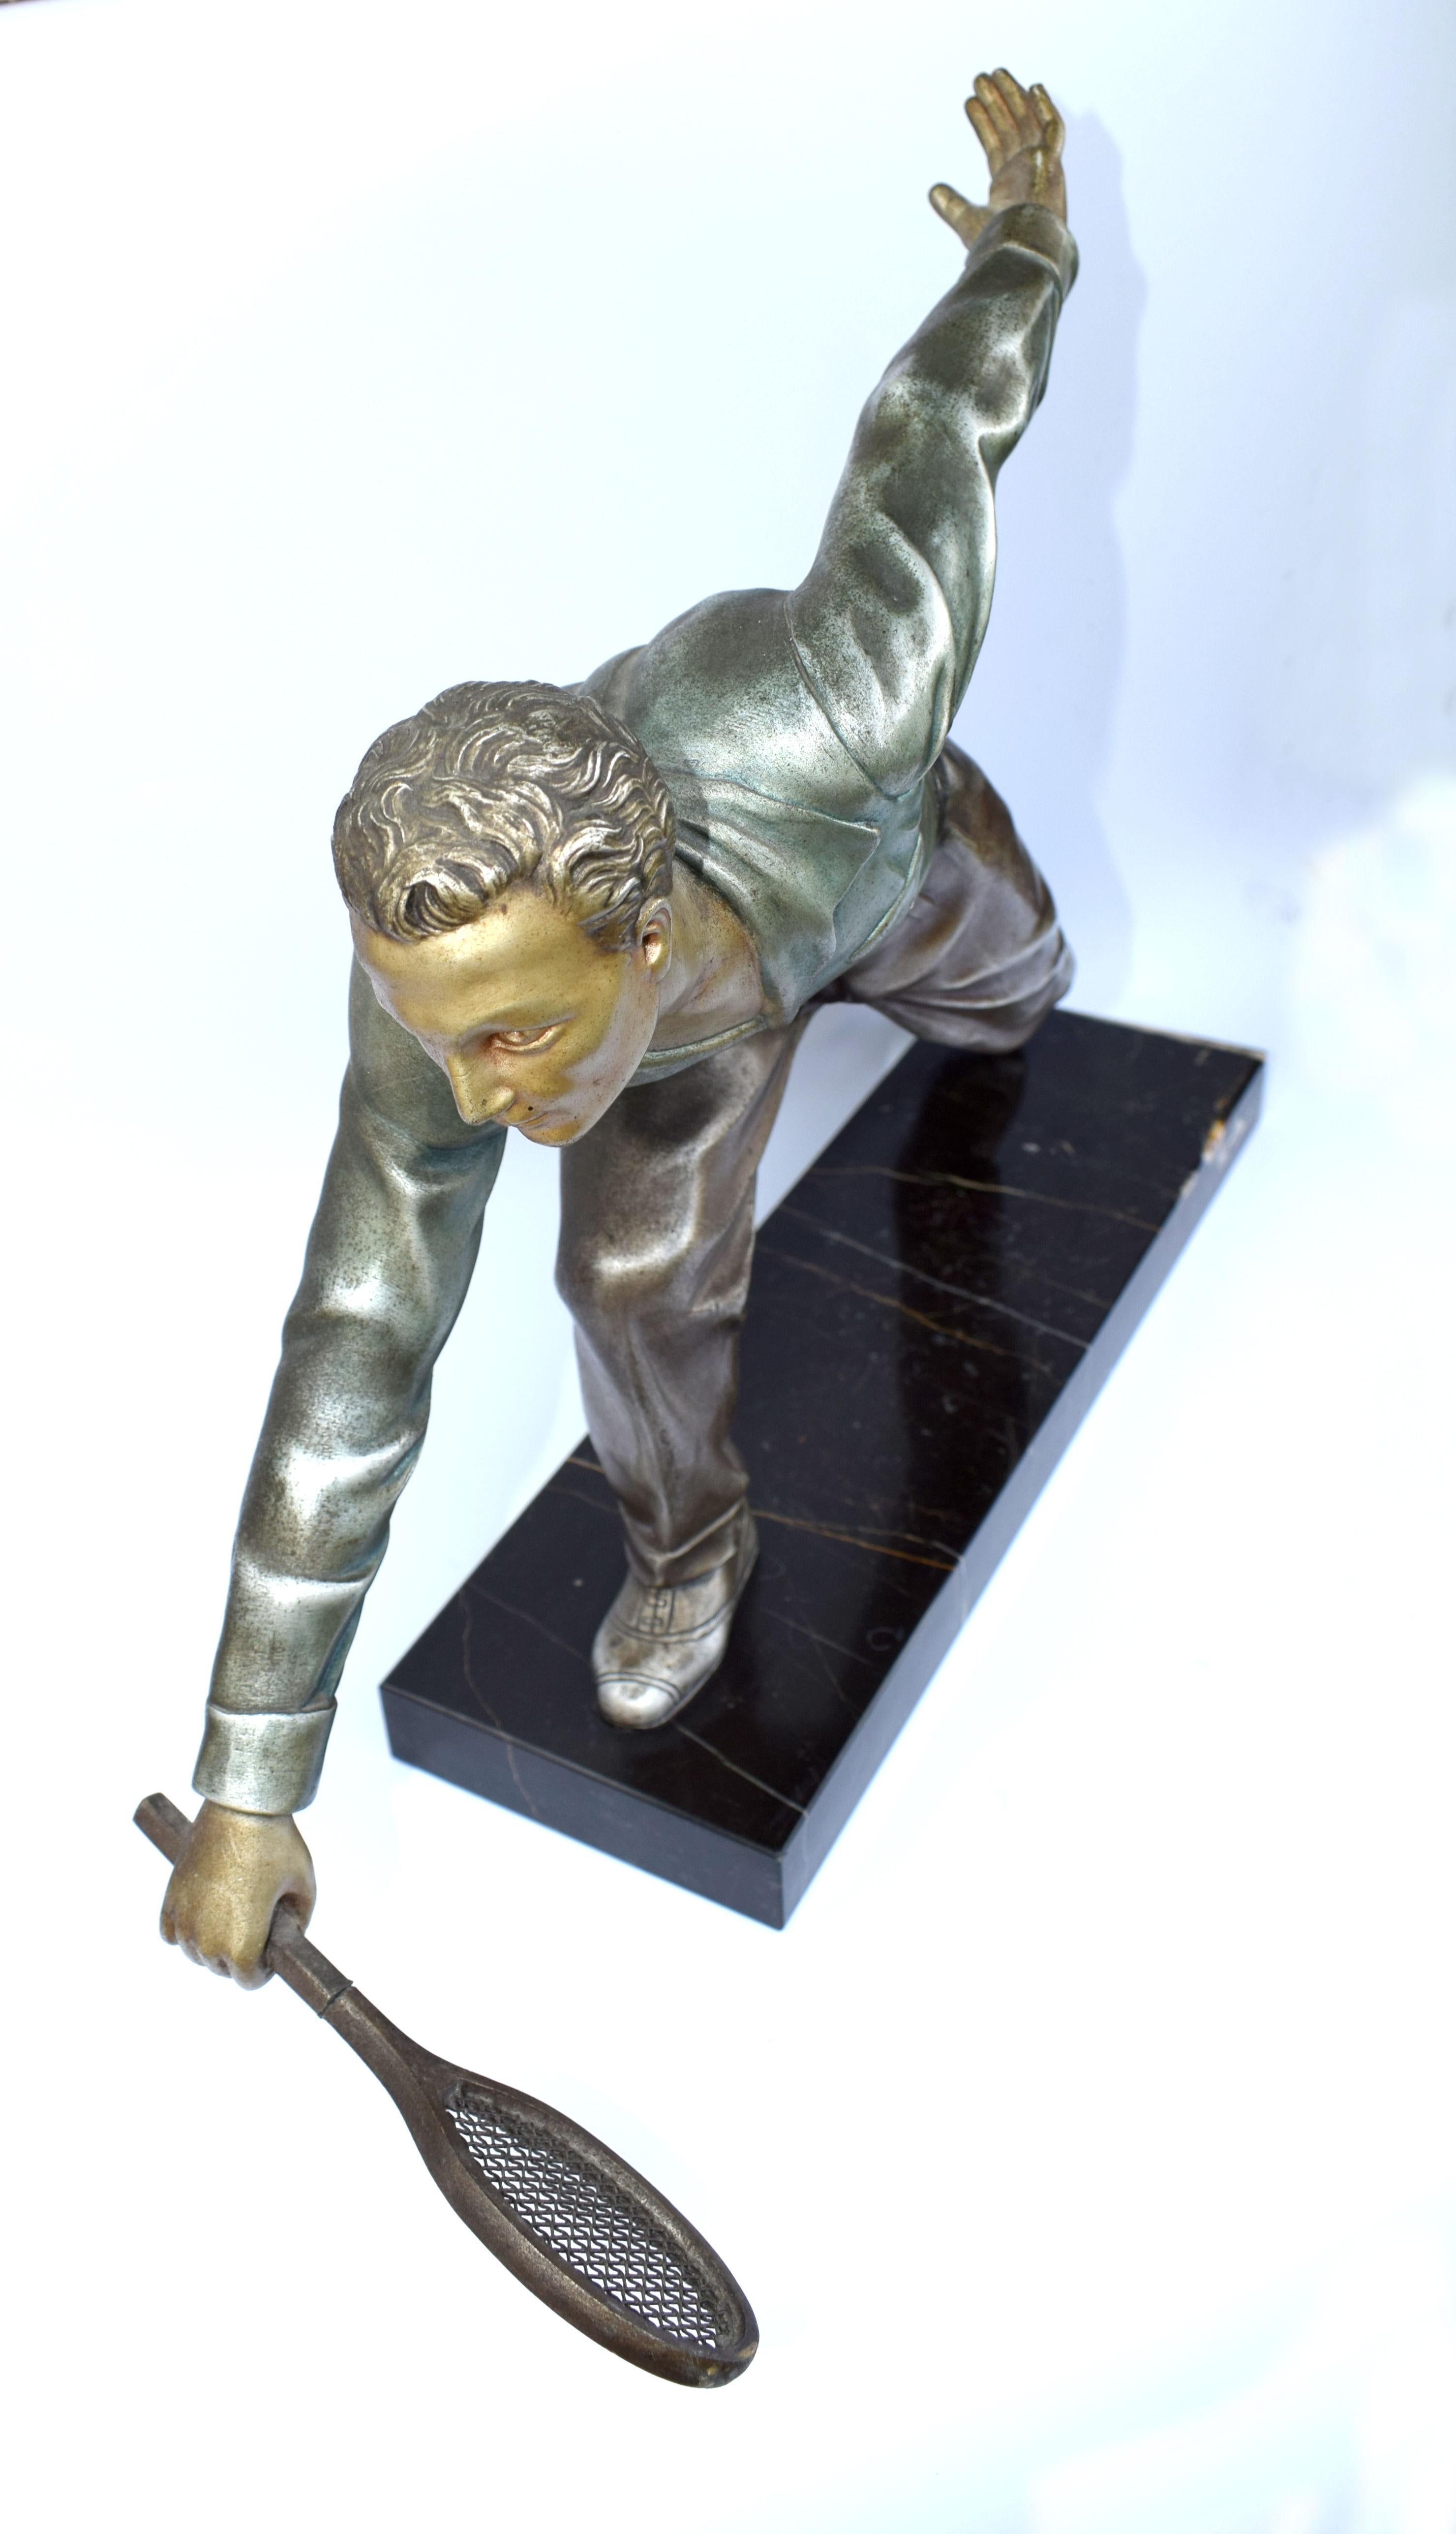 Huge Art Deco Male Figure Tennis Player, French, circa 1930 In Good Condition For Sale In Devon, England